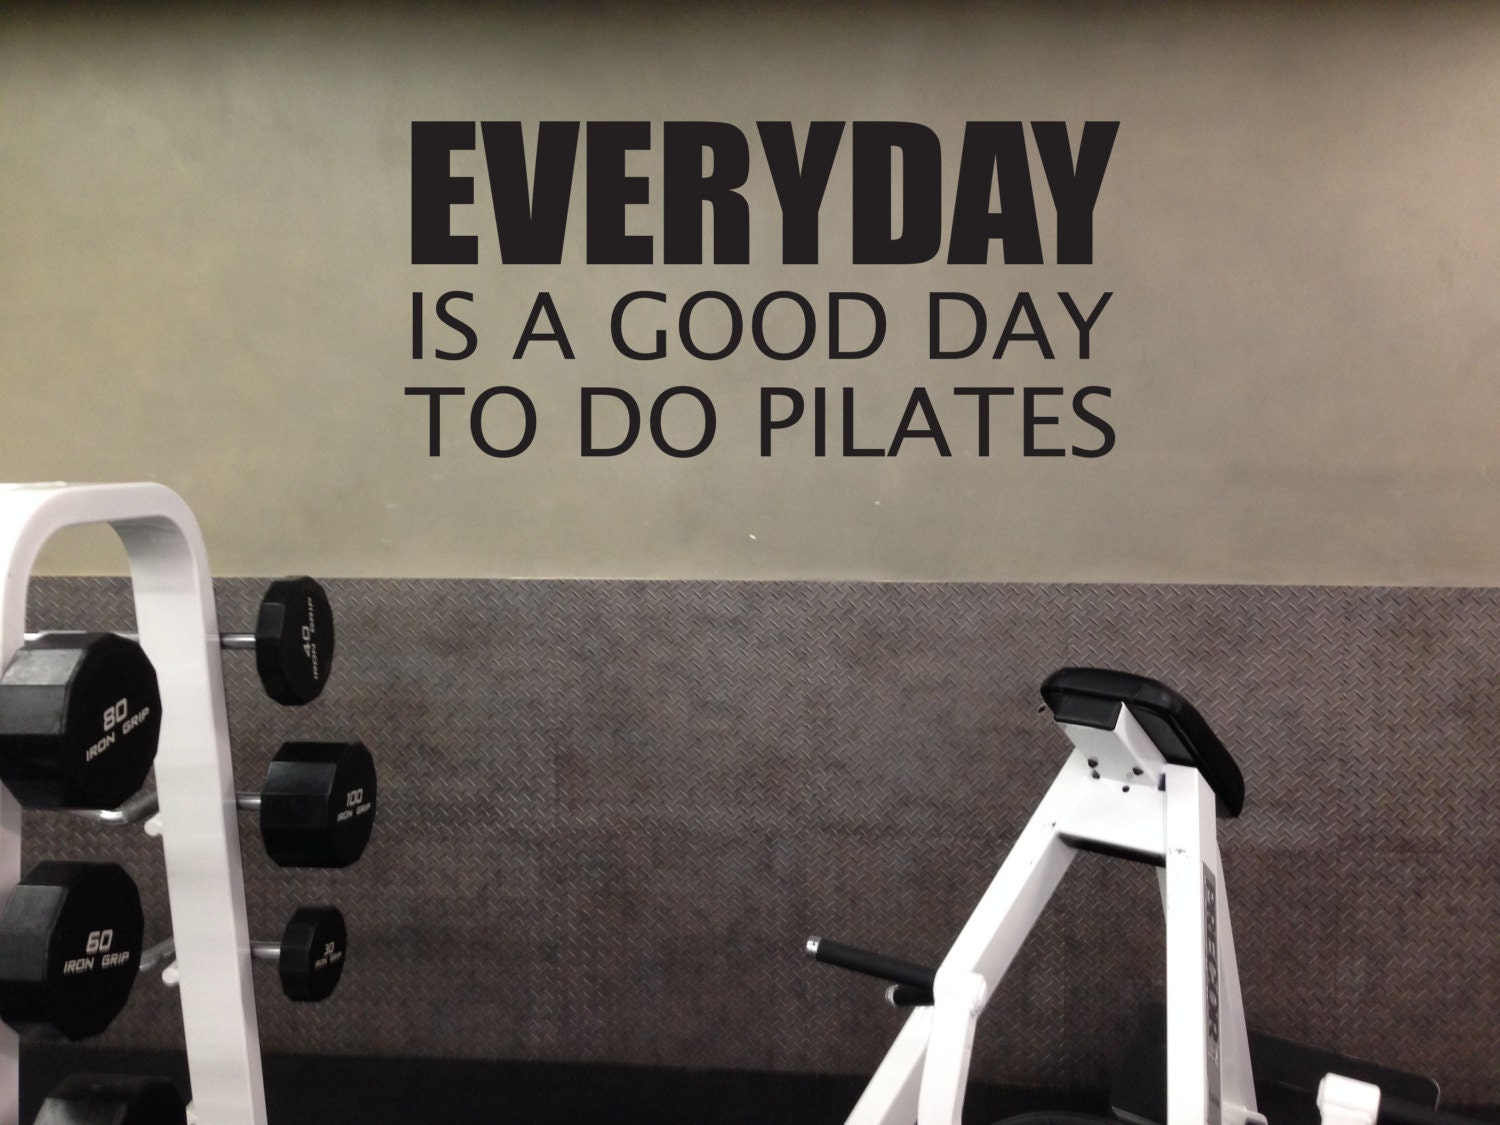 Pilates Decor, Pilates Wall Decal, Pilates Vinyl Decal, EVERYDAY is a Good  Day to Do Pilates 